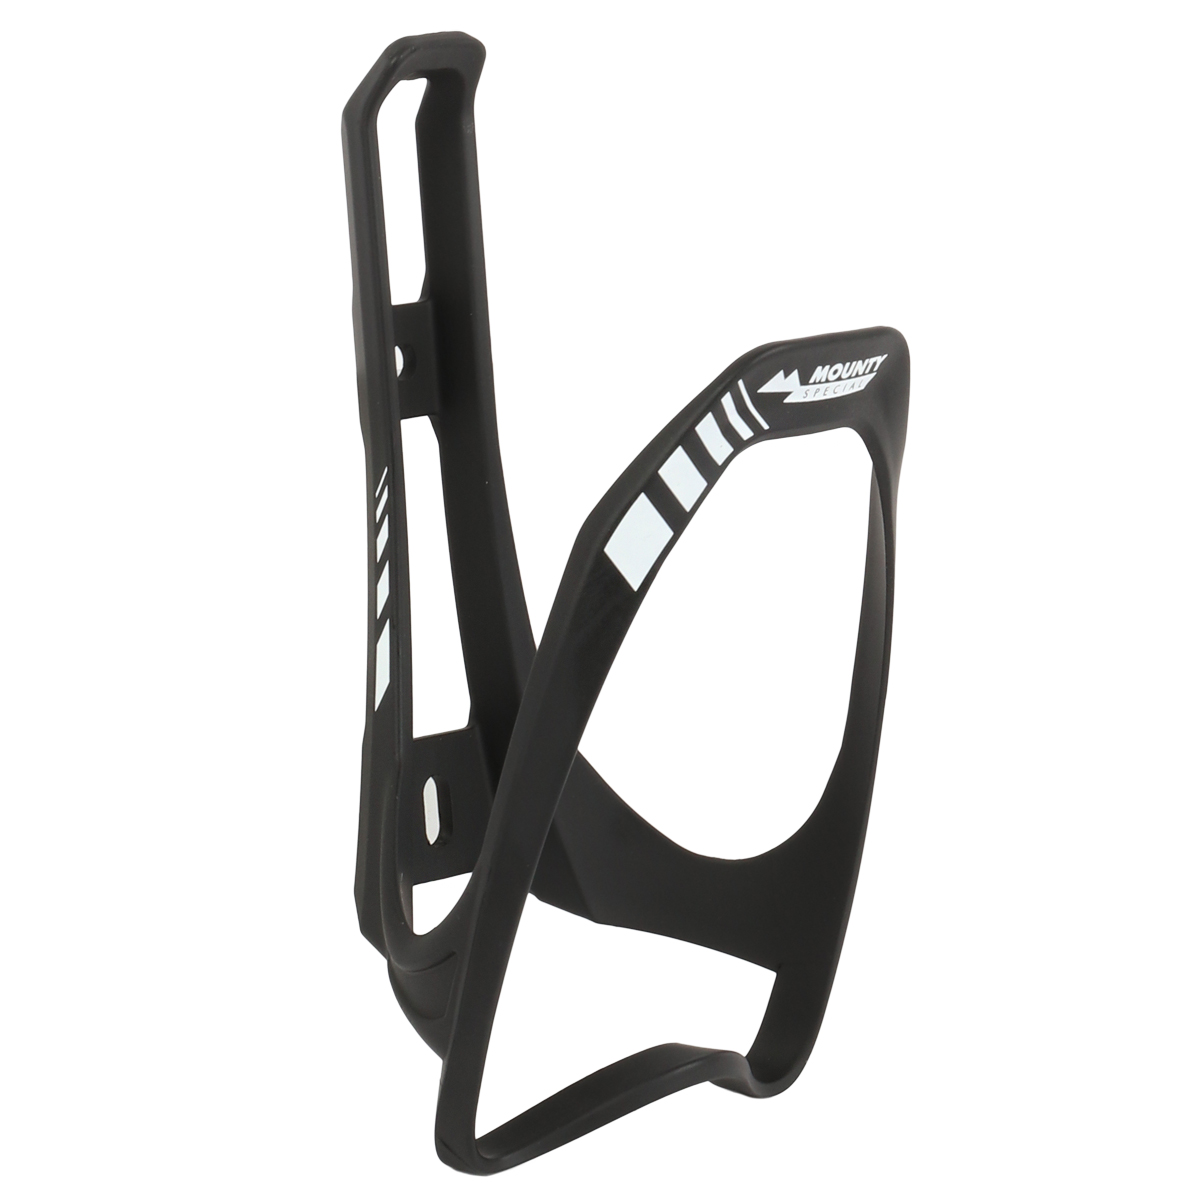 Productfoto van Mounty Special Lite-Cage Bottle Cage - black/white